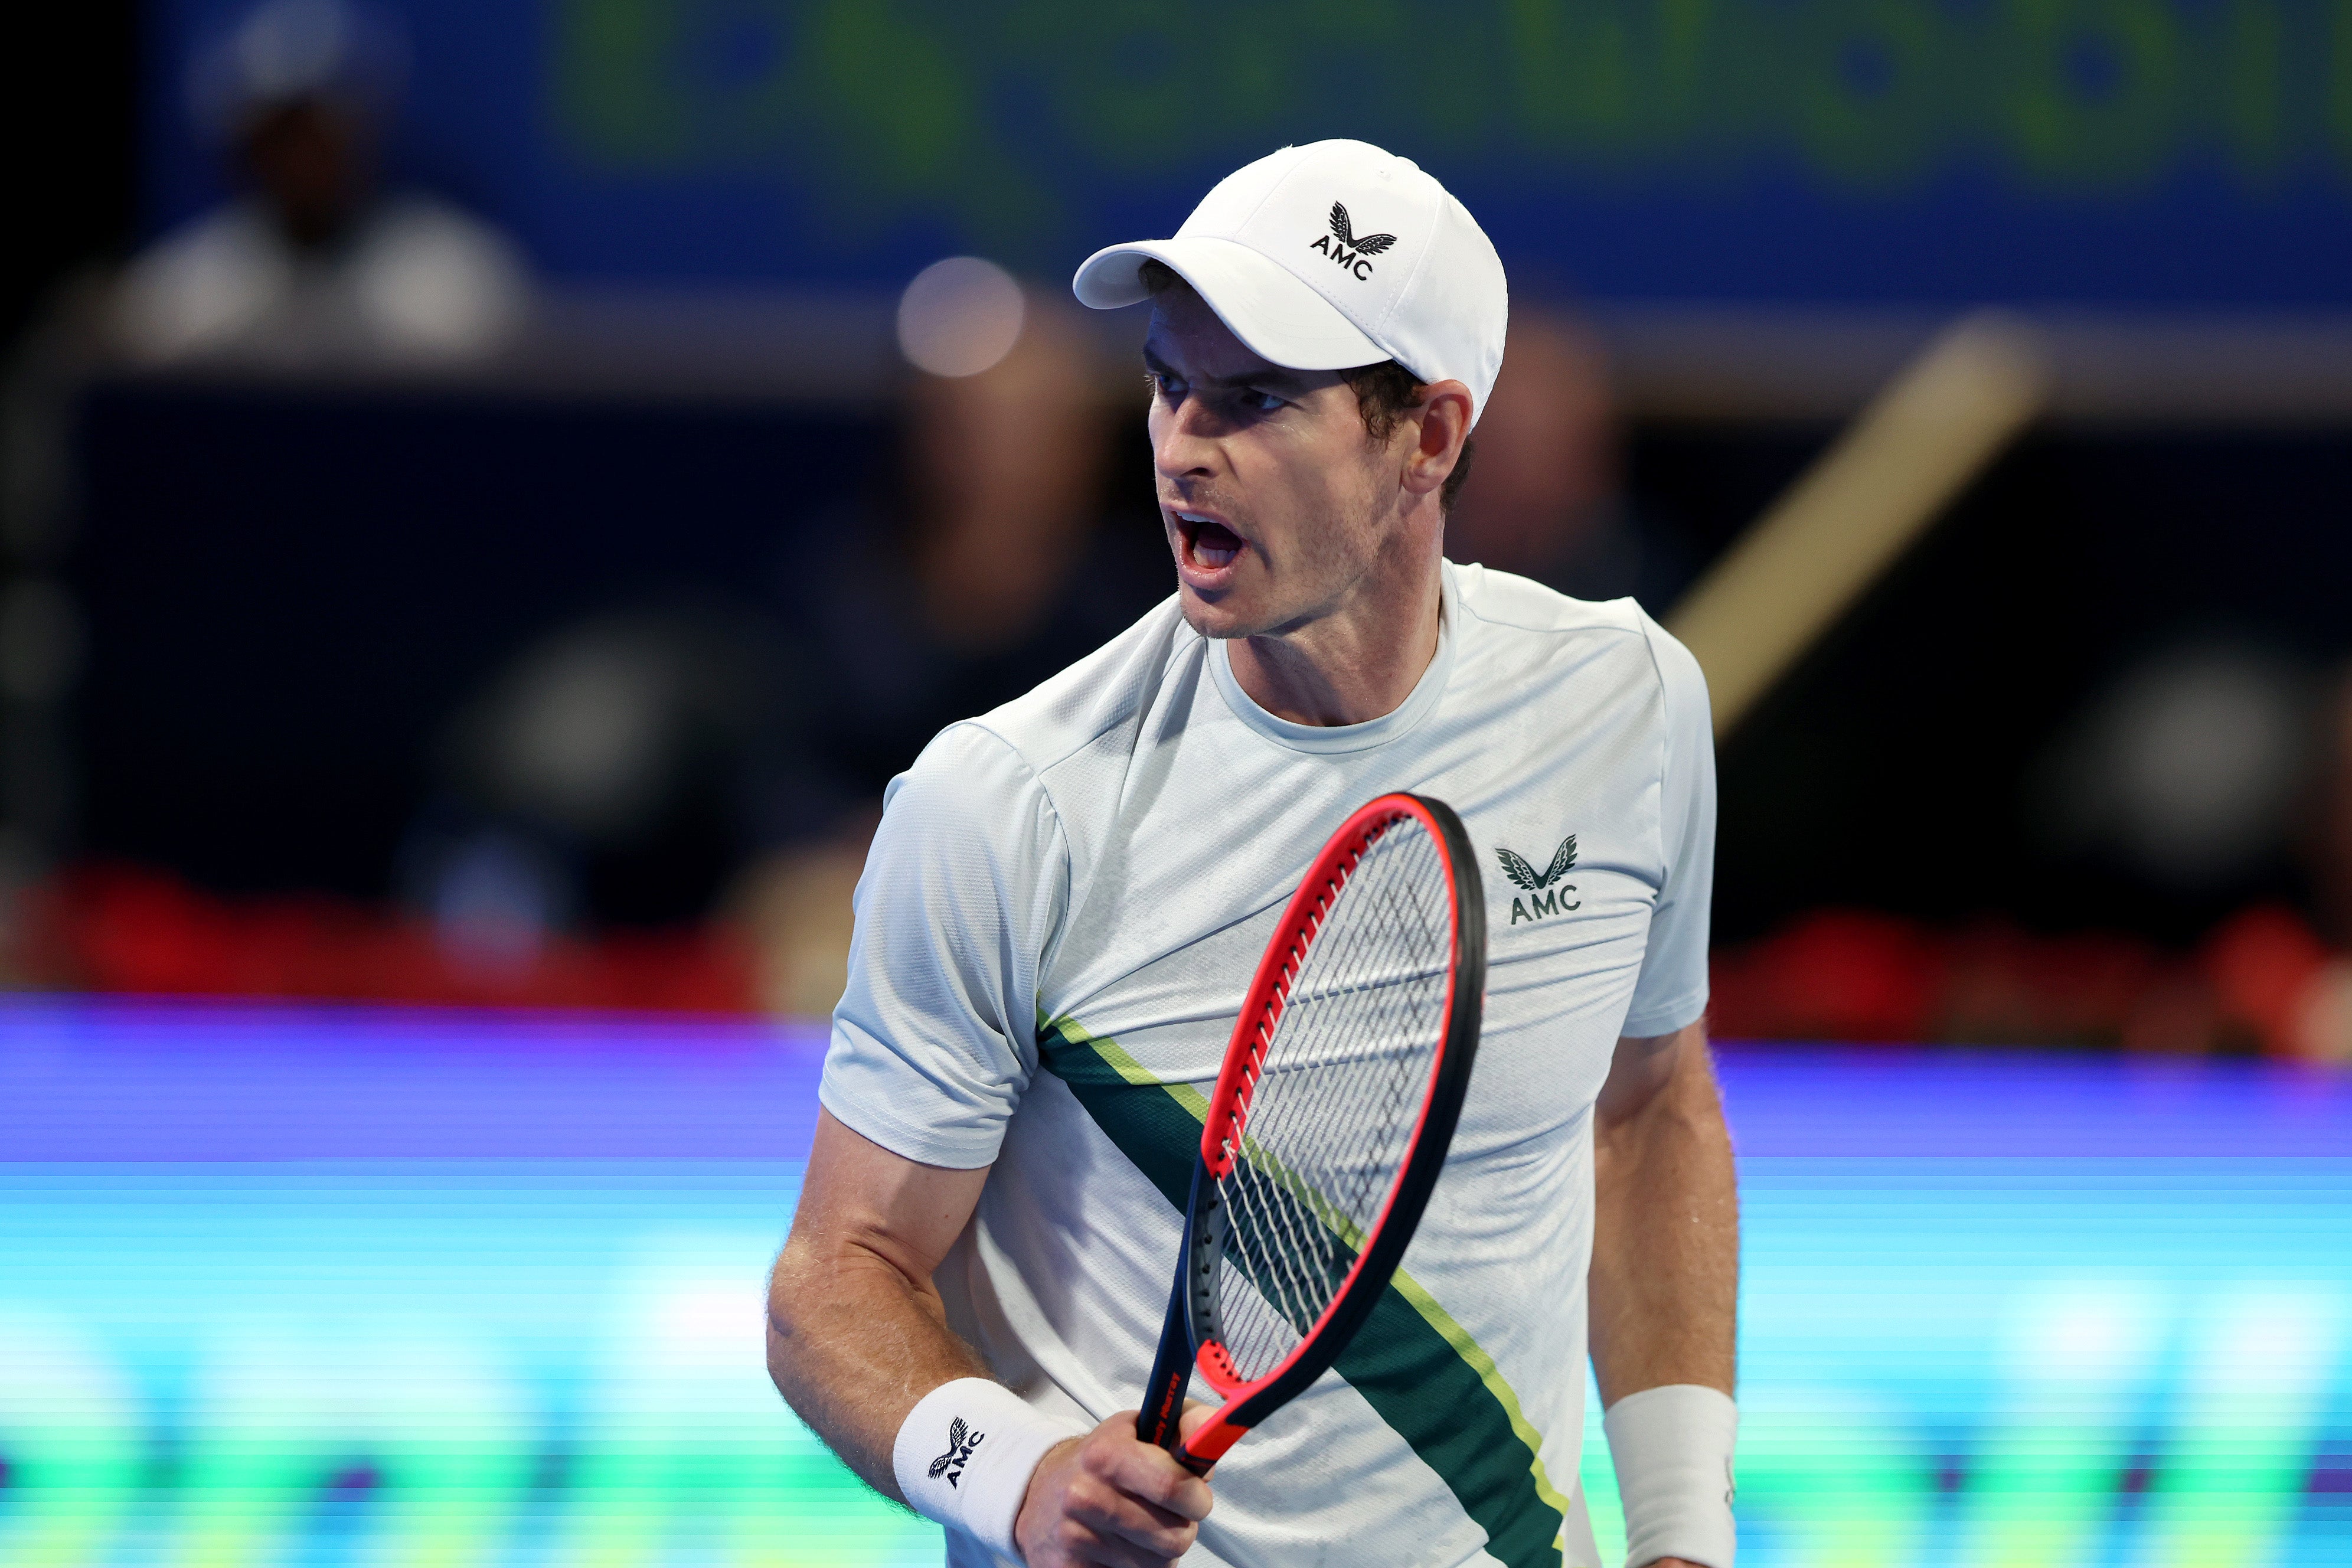 Andy Murray came from a set down to beat Alexandre Muller in the Qatar Open quarter-finals